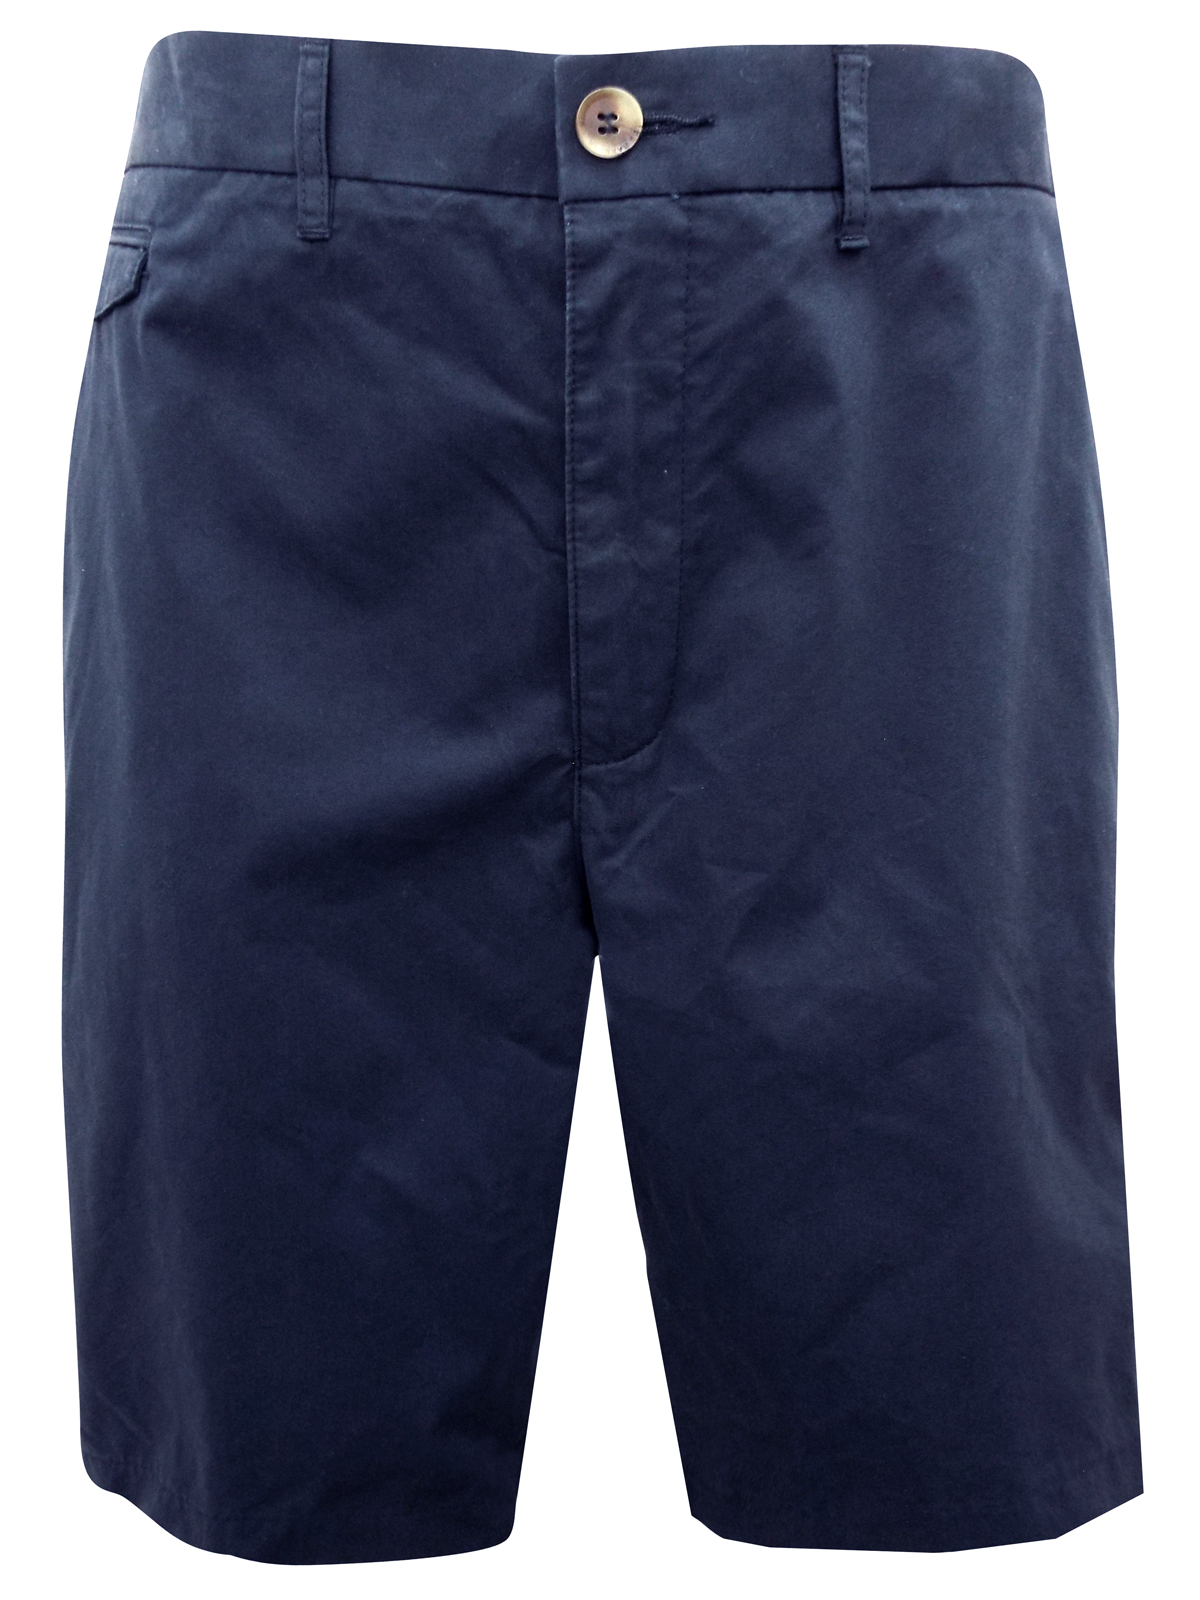 Marks and Spencer - - M&5 NAVY Pure Cotton Cargo Shorts - Waist Size 38 ...